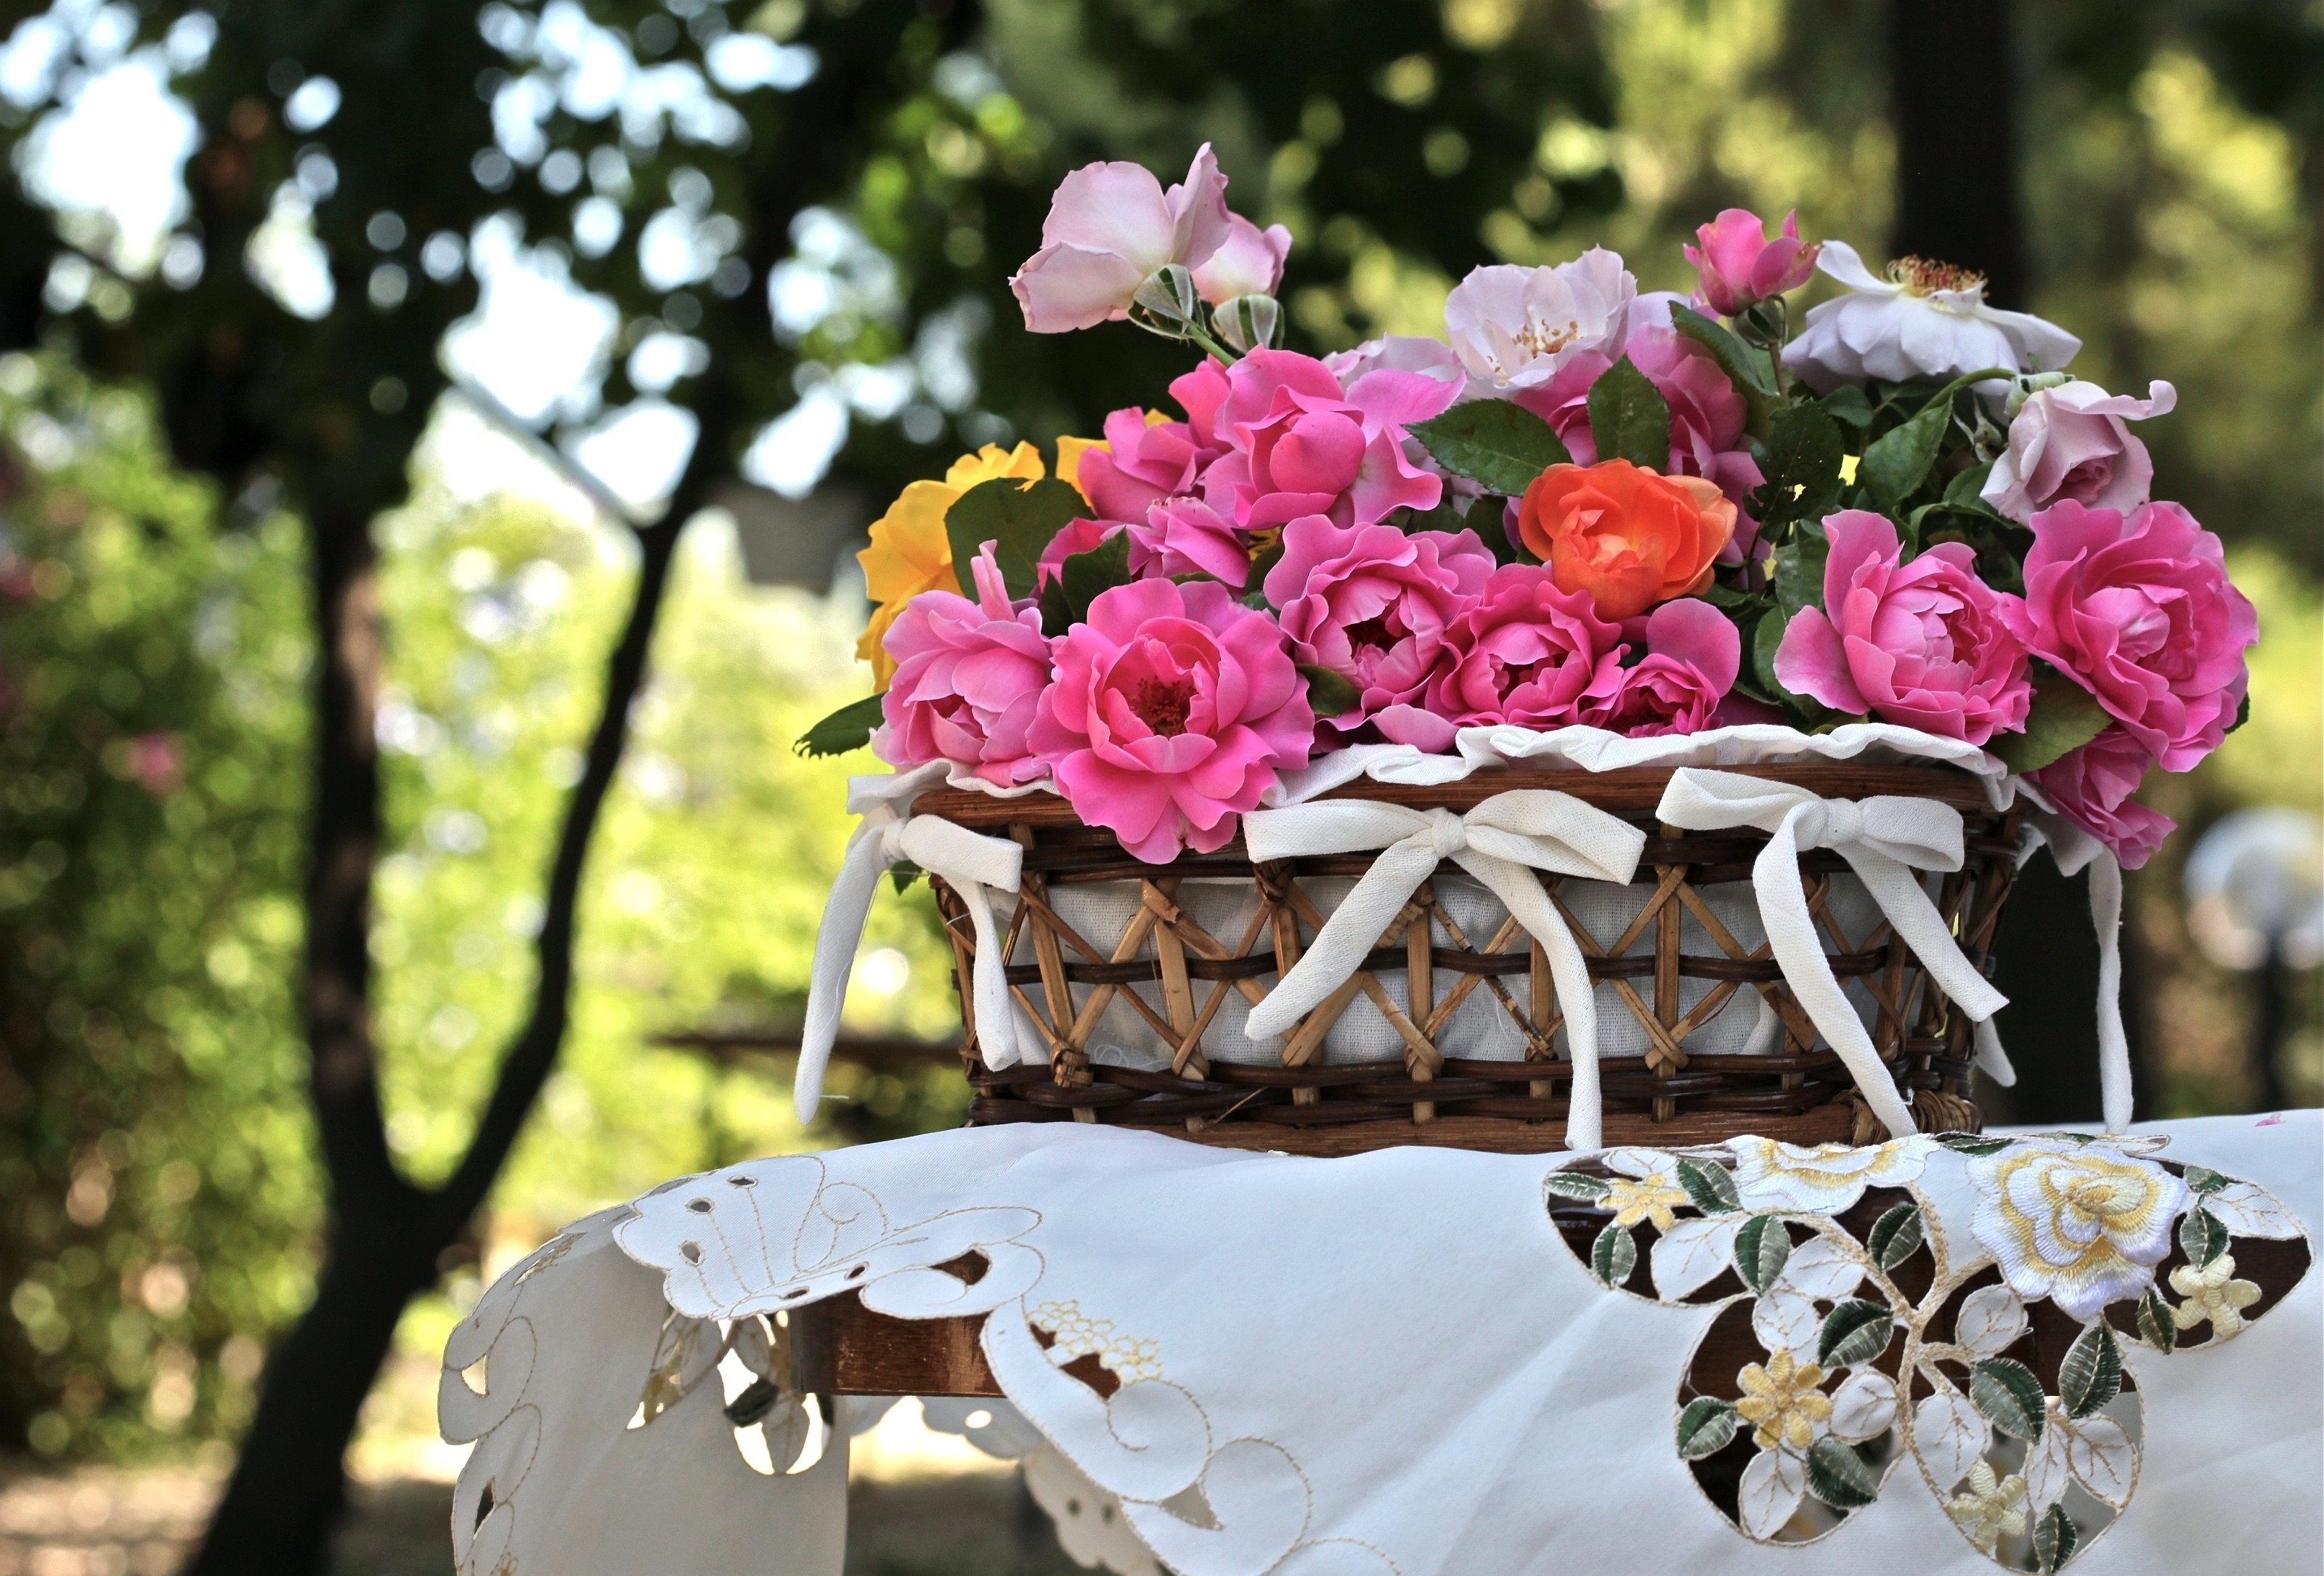 flowers, roses, basket, composition, bows, tablecloth